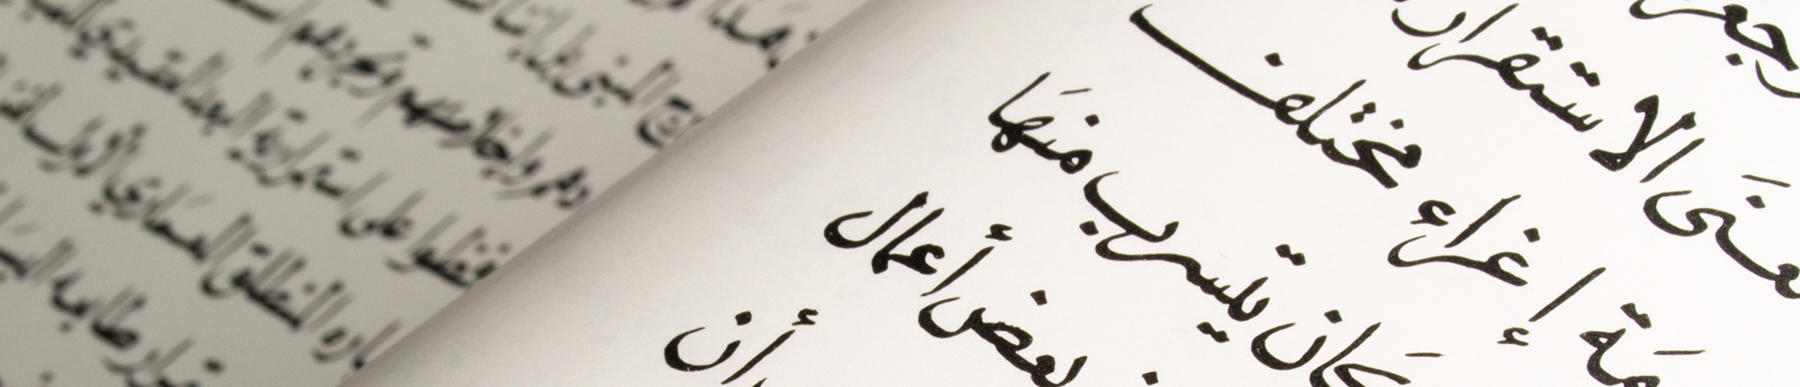 photo of arabic text